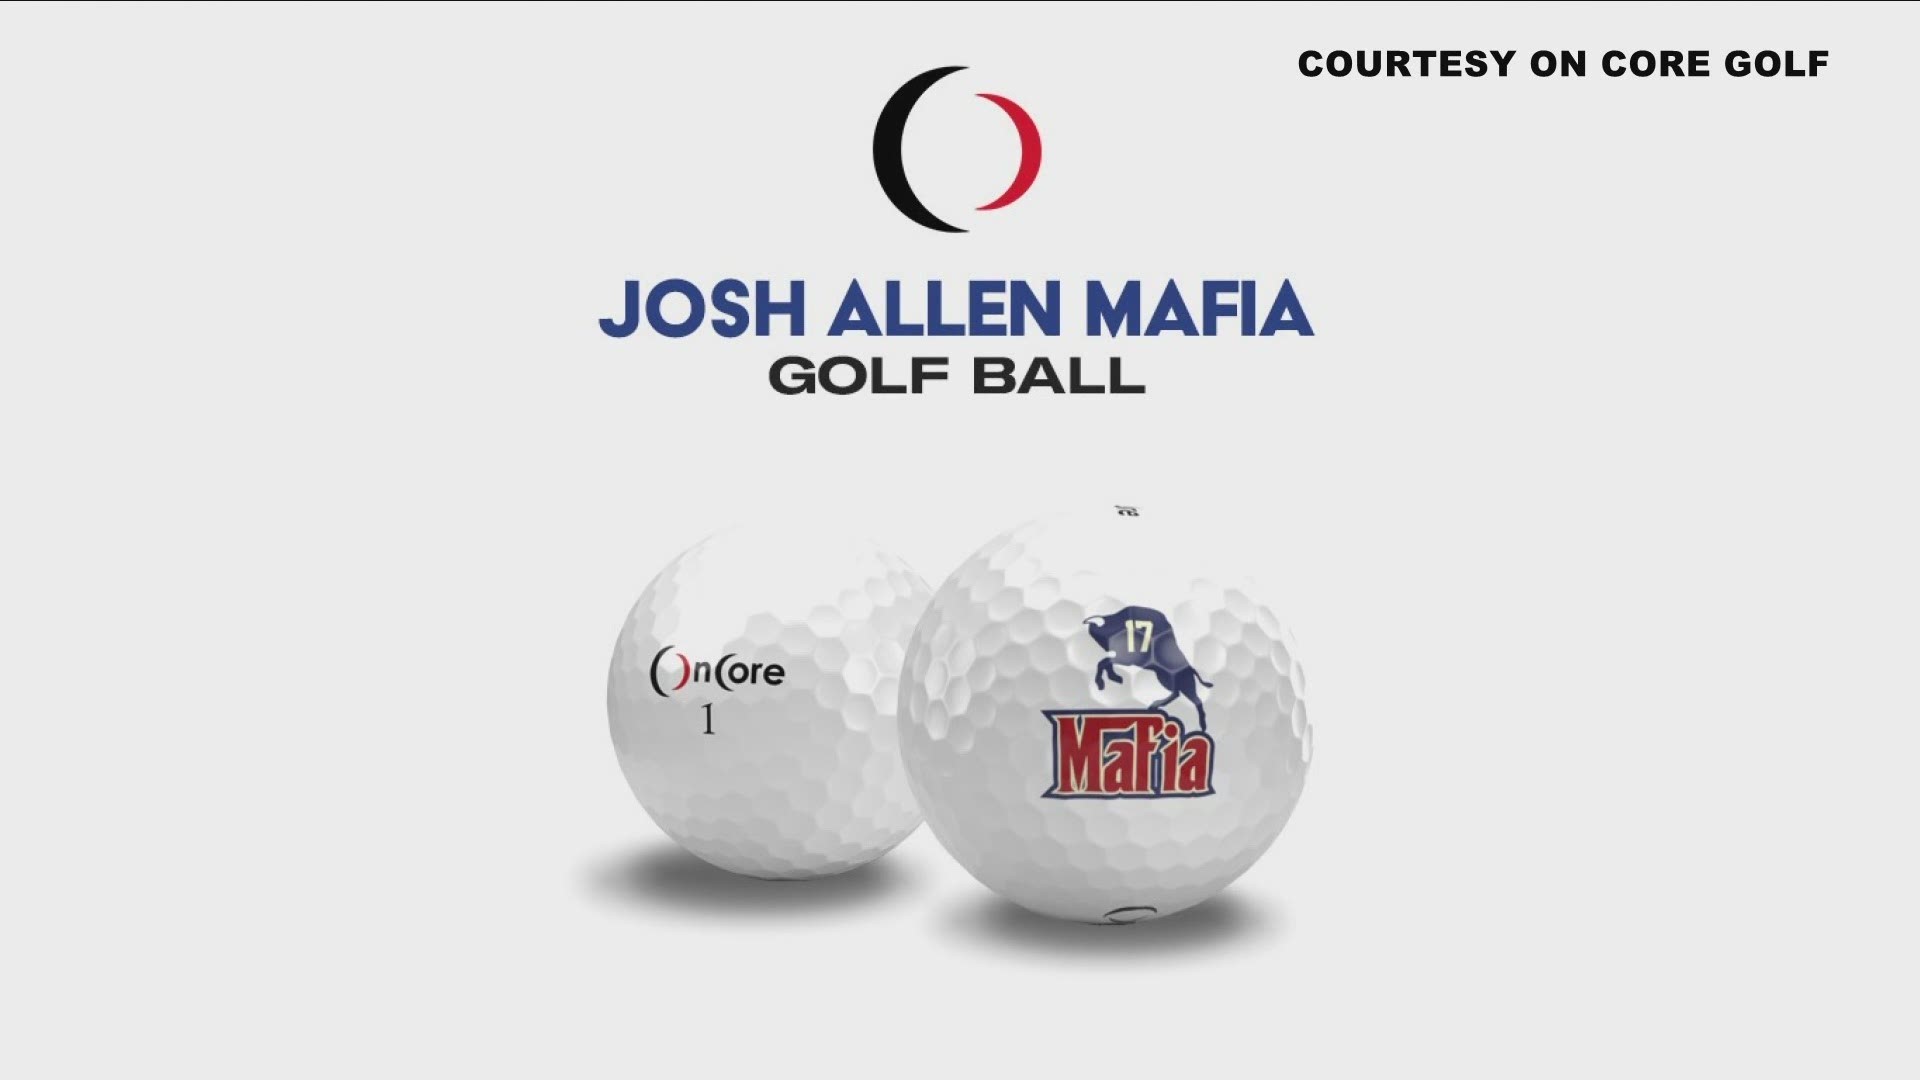 A portion of the proceeds from the "Josh Allen Mafia" golf balls will be donated to Oishei Children's Hospital